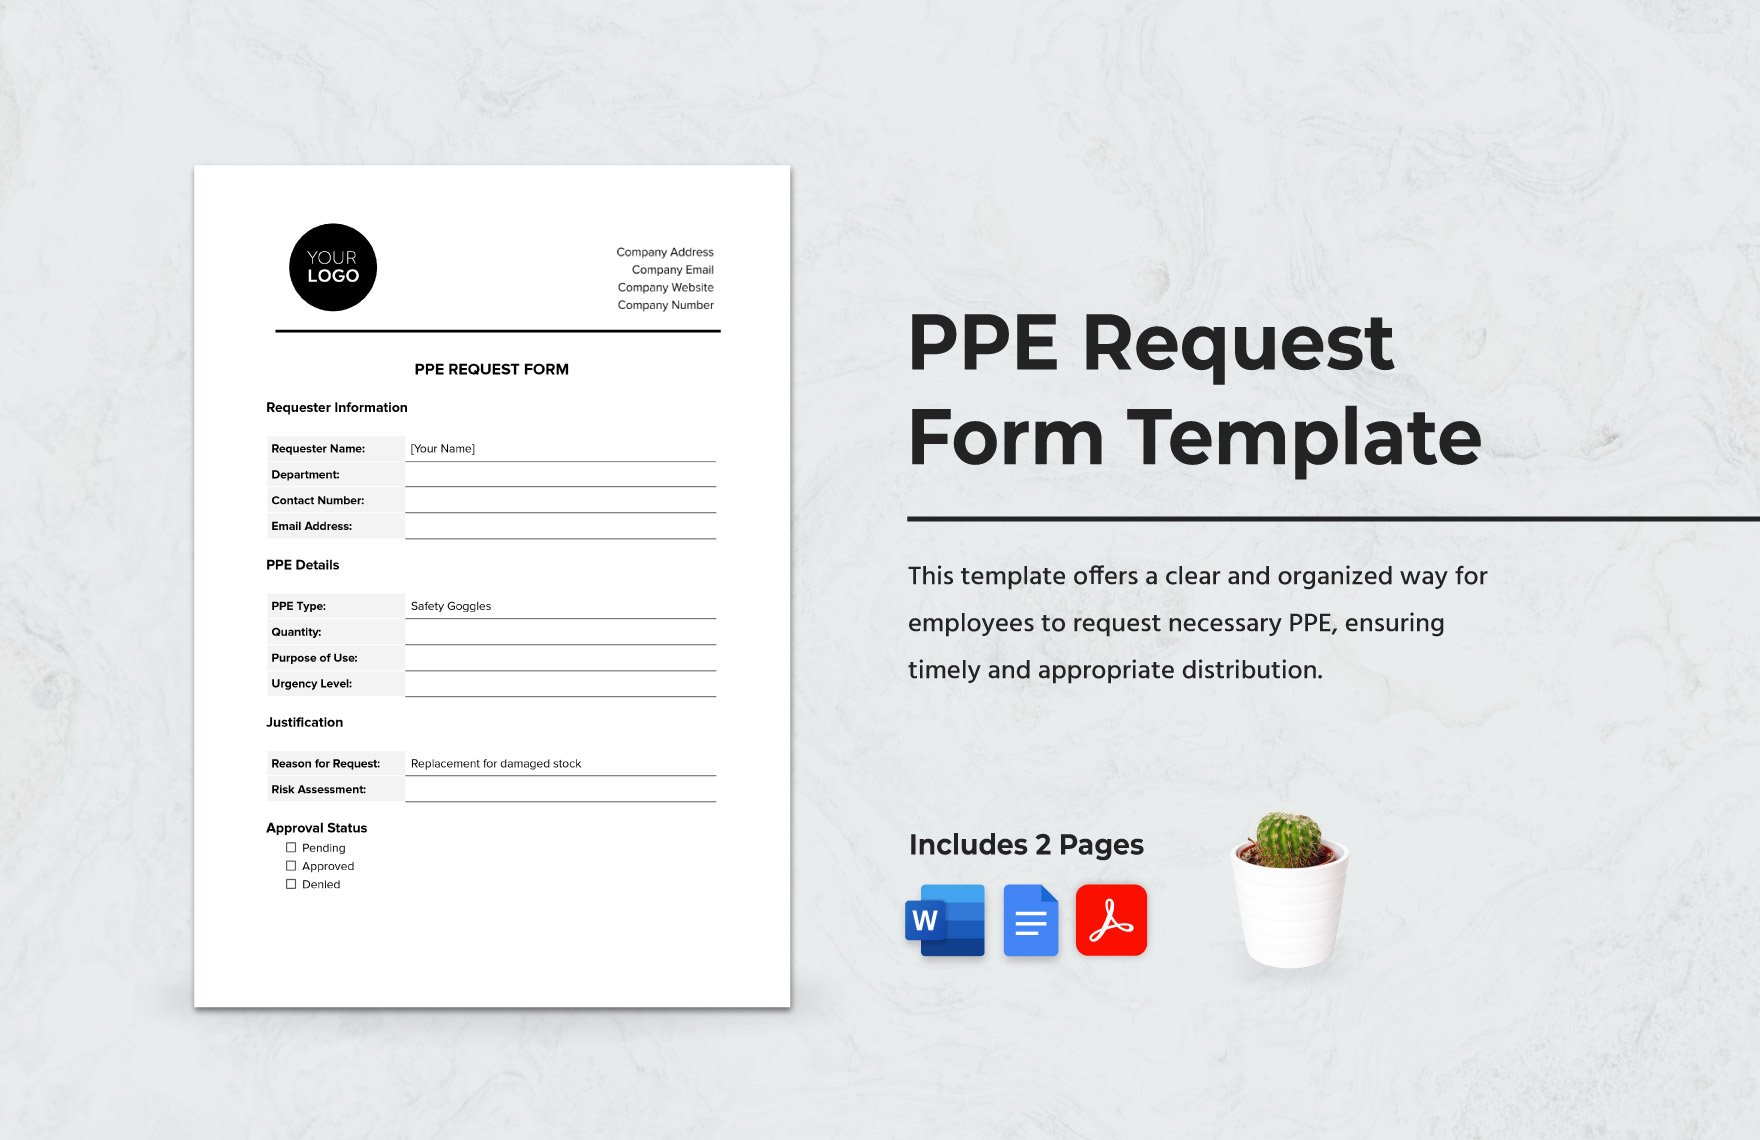 PPE Request Form Template